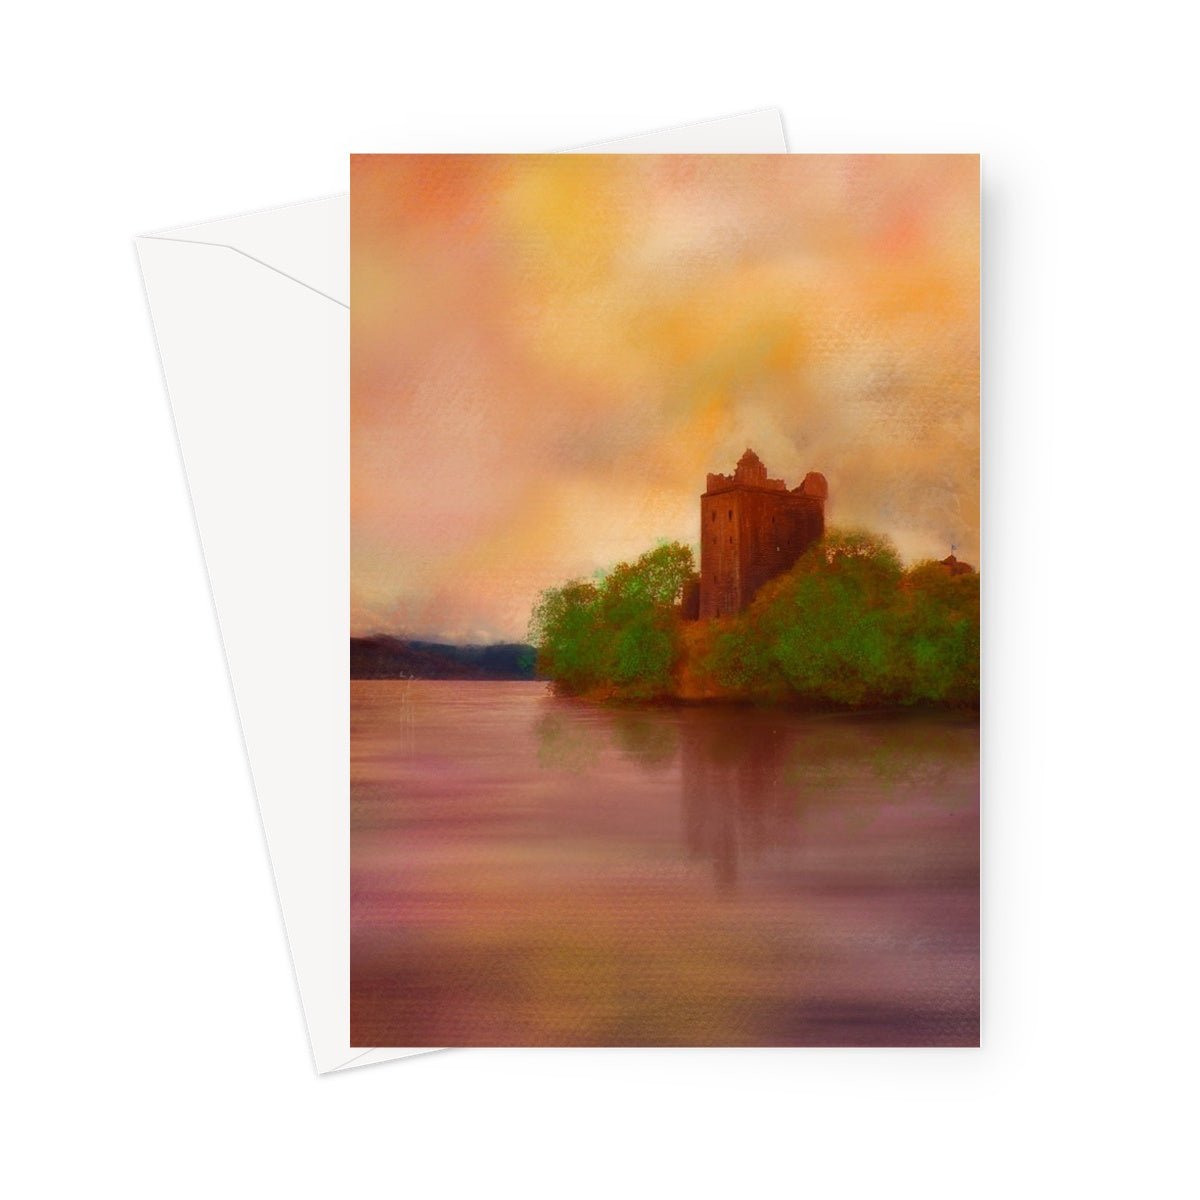 Urquhart Castle Art Gifts Greeting Card-Greetings Cards-Historic & Iconic Scotland Art Gallery-5"x7"-1 Card-Paintings, Prints, Homeware, Art Gifts From Scotland By Scottish Artist Kevin Hunter